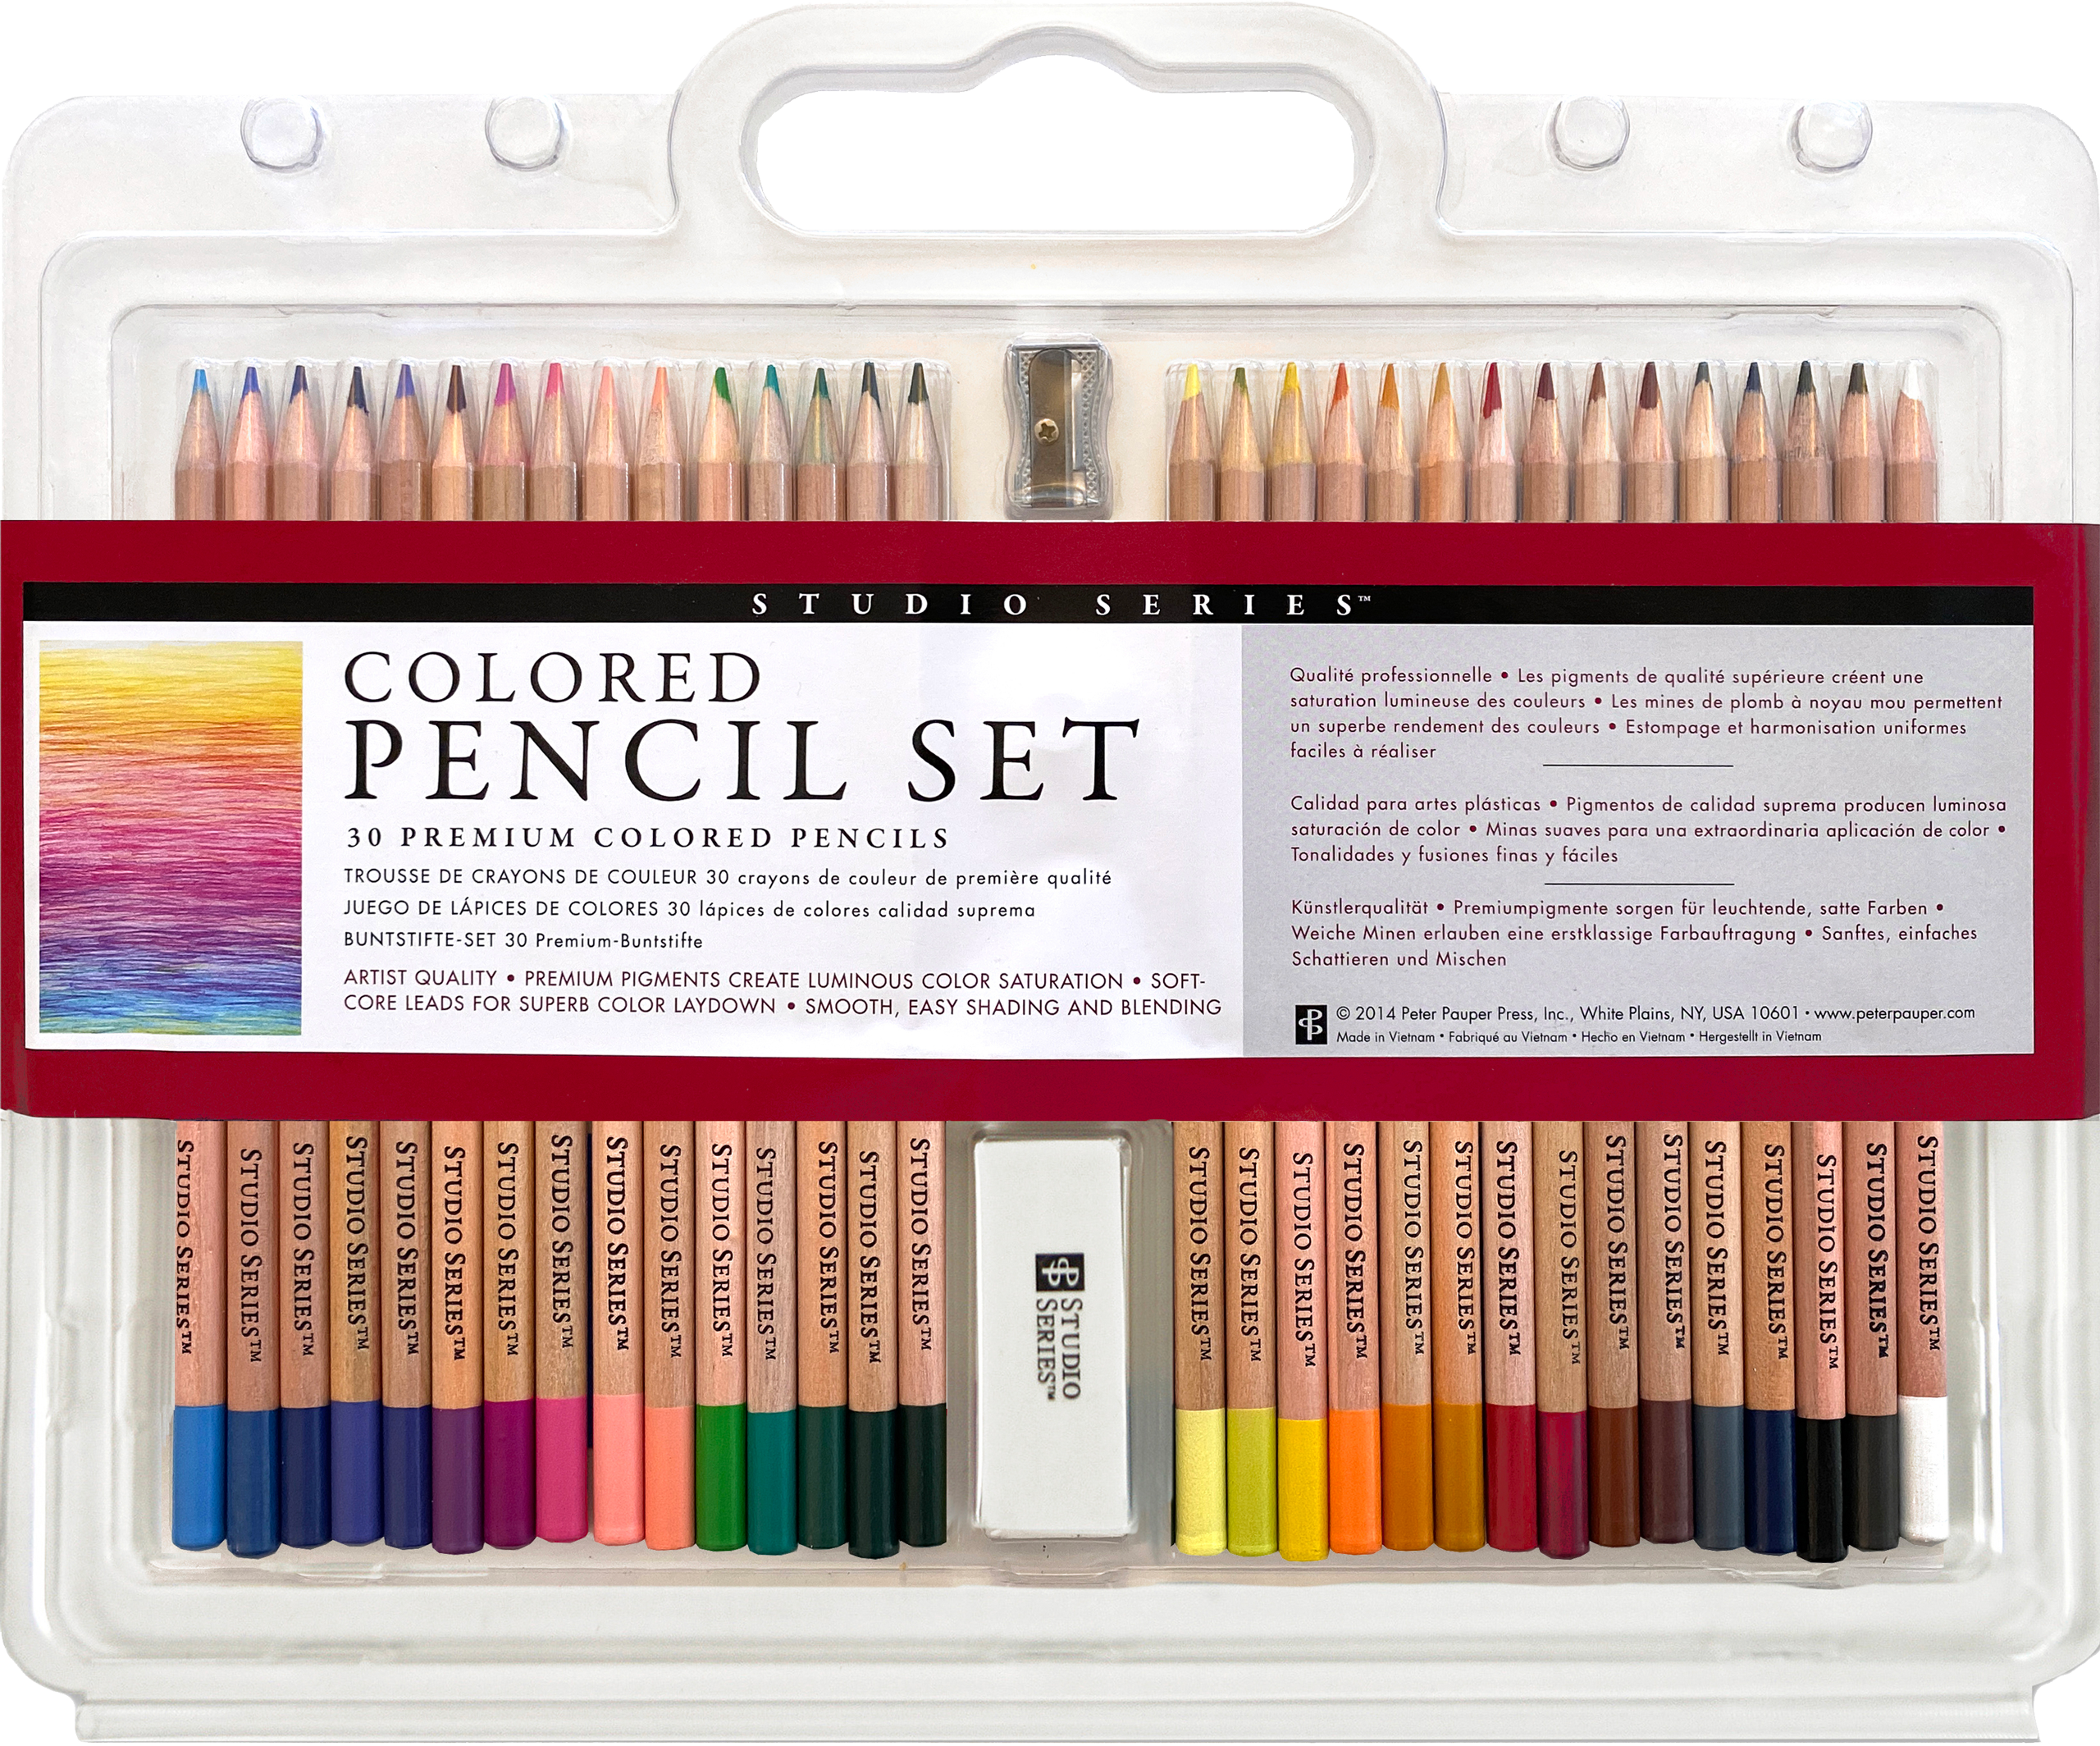 Red Crayons And Flesh Colored Crayons, Crayon, Brush, Art PNG